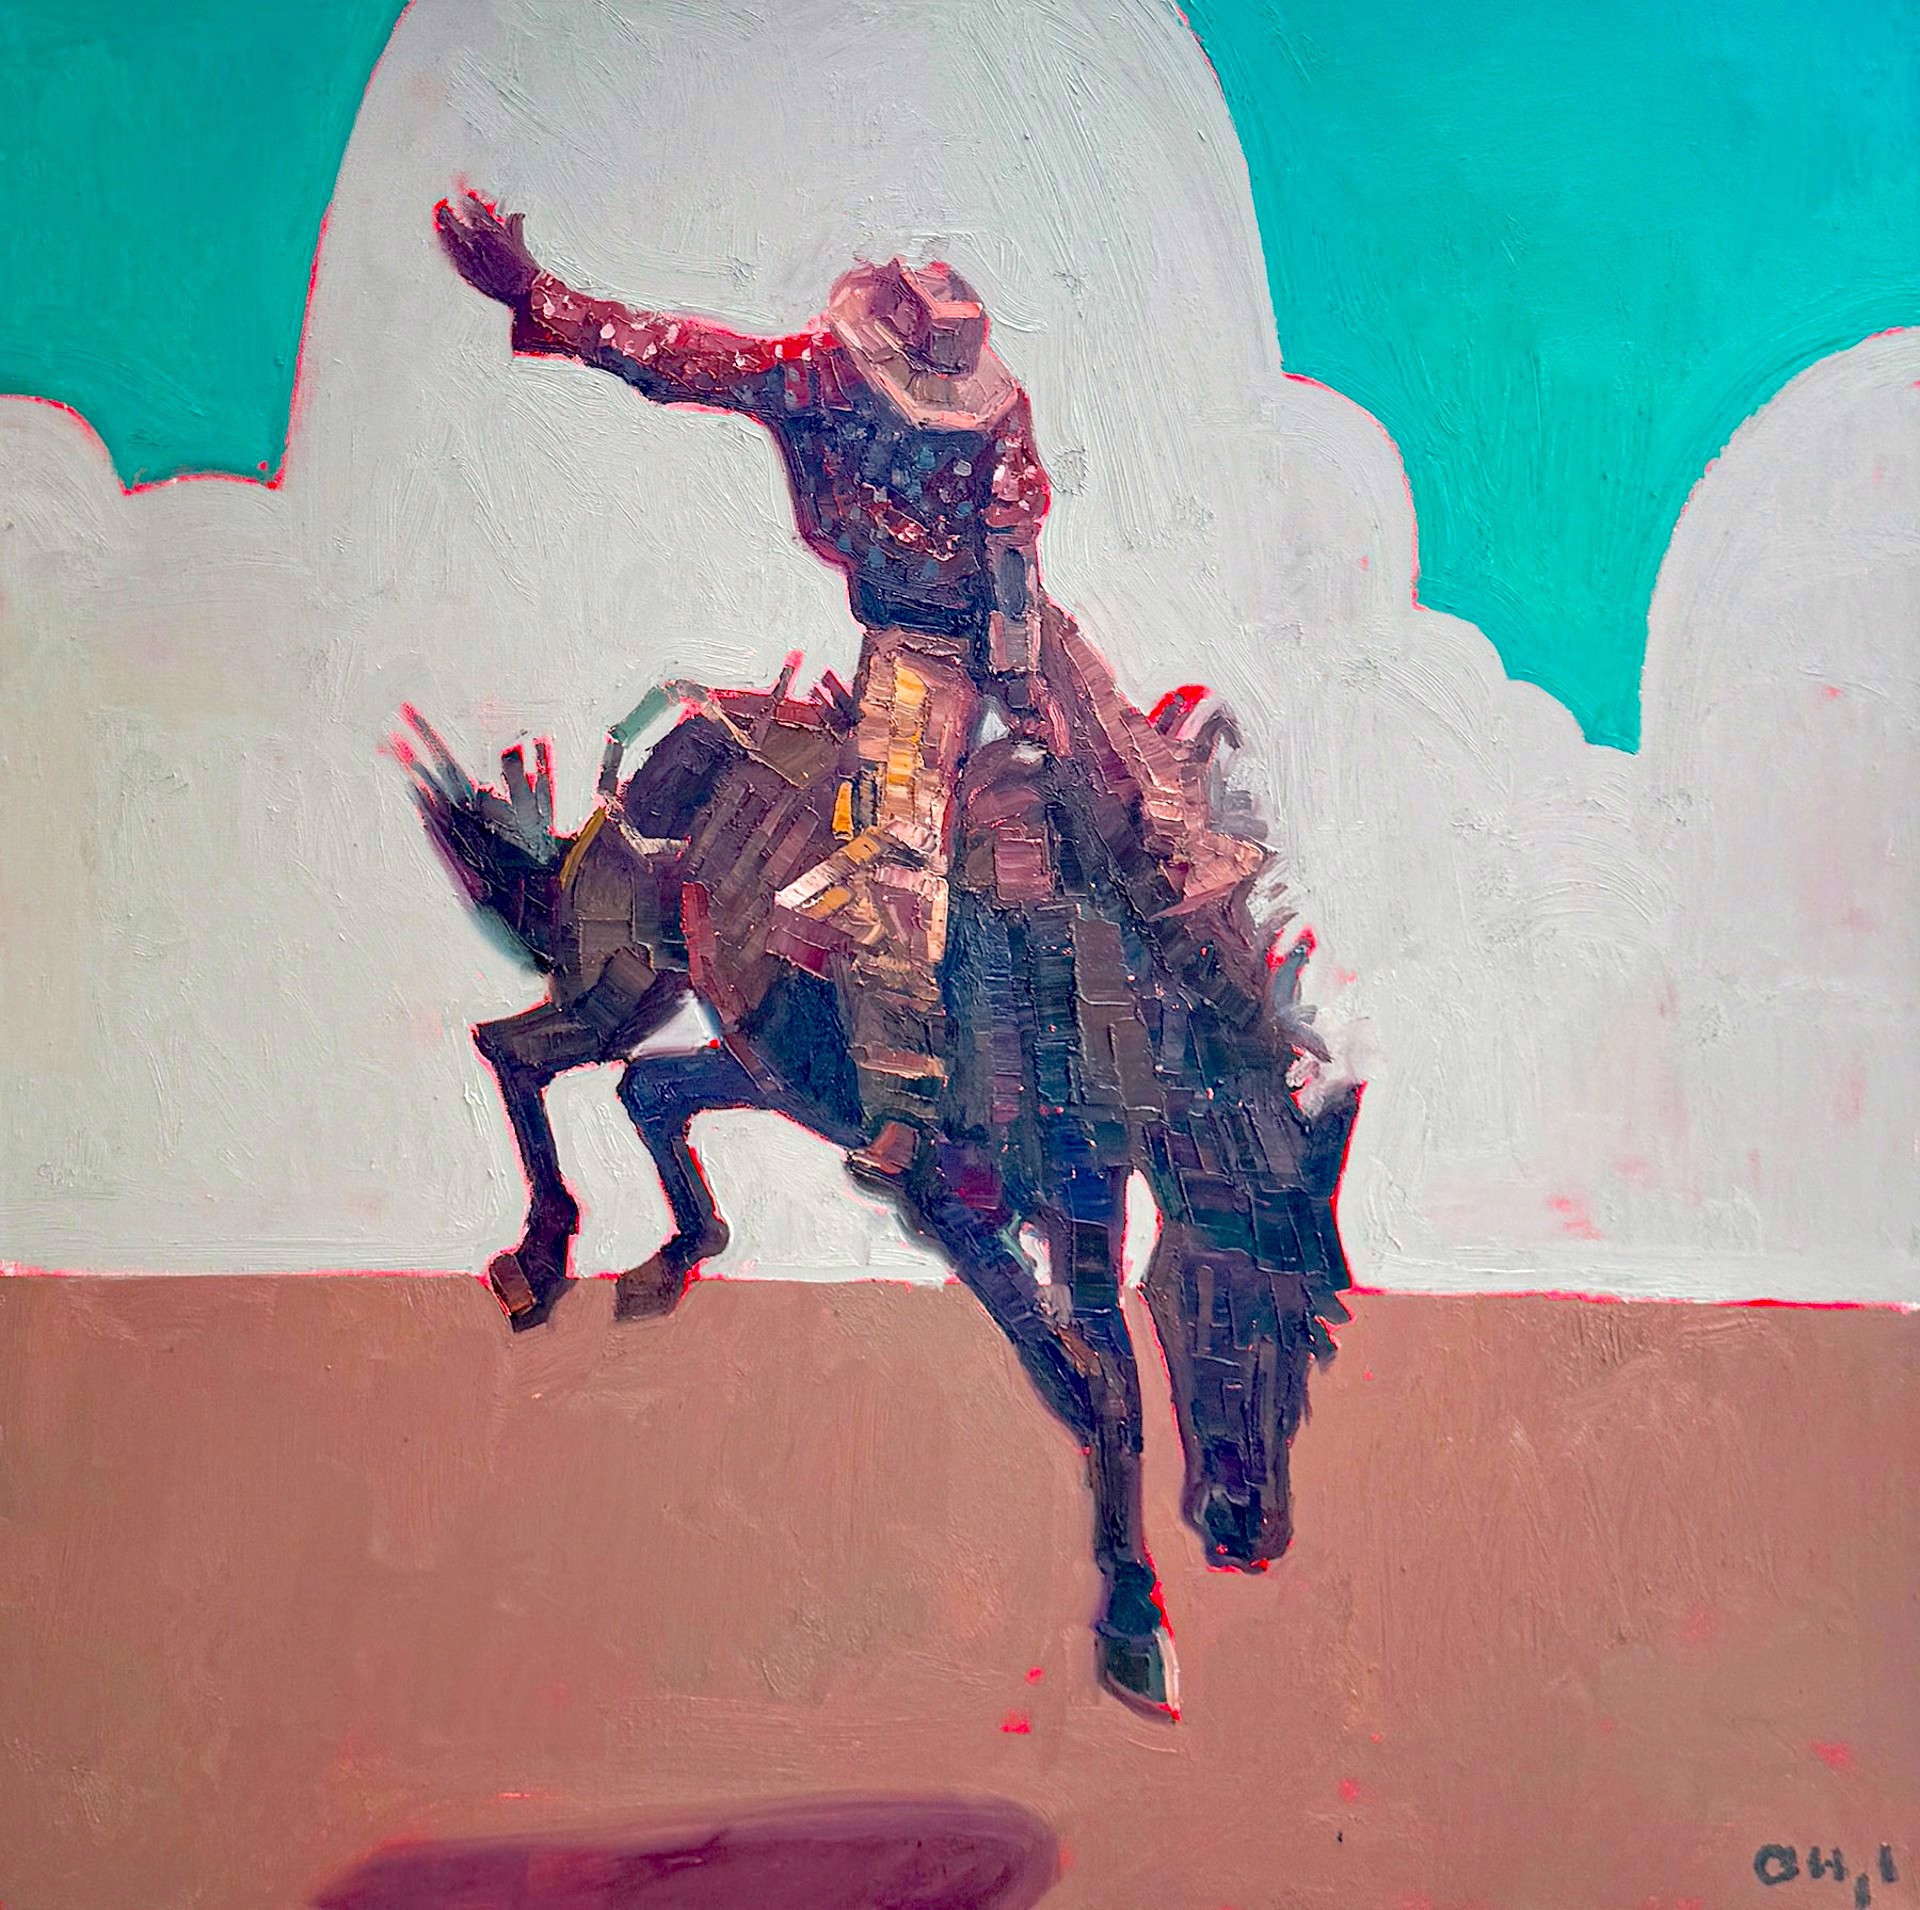 Original Oil Painting By Aaron Hazel Featuring A Cowboy Riding A Bucking Bronco